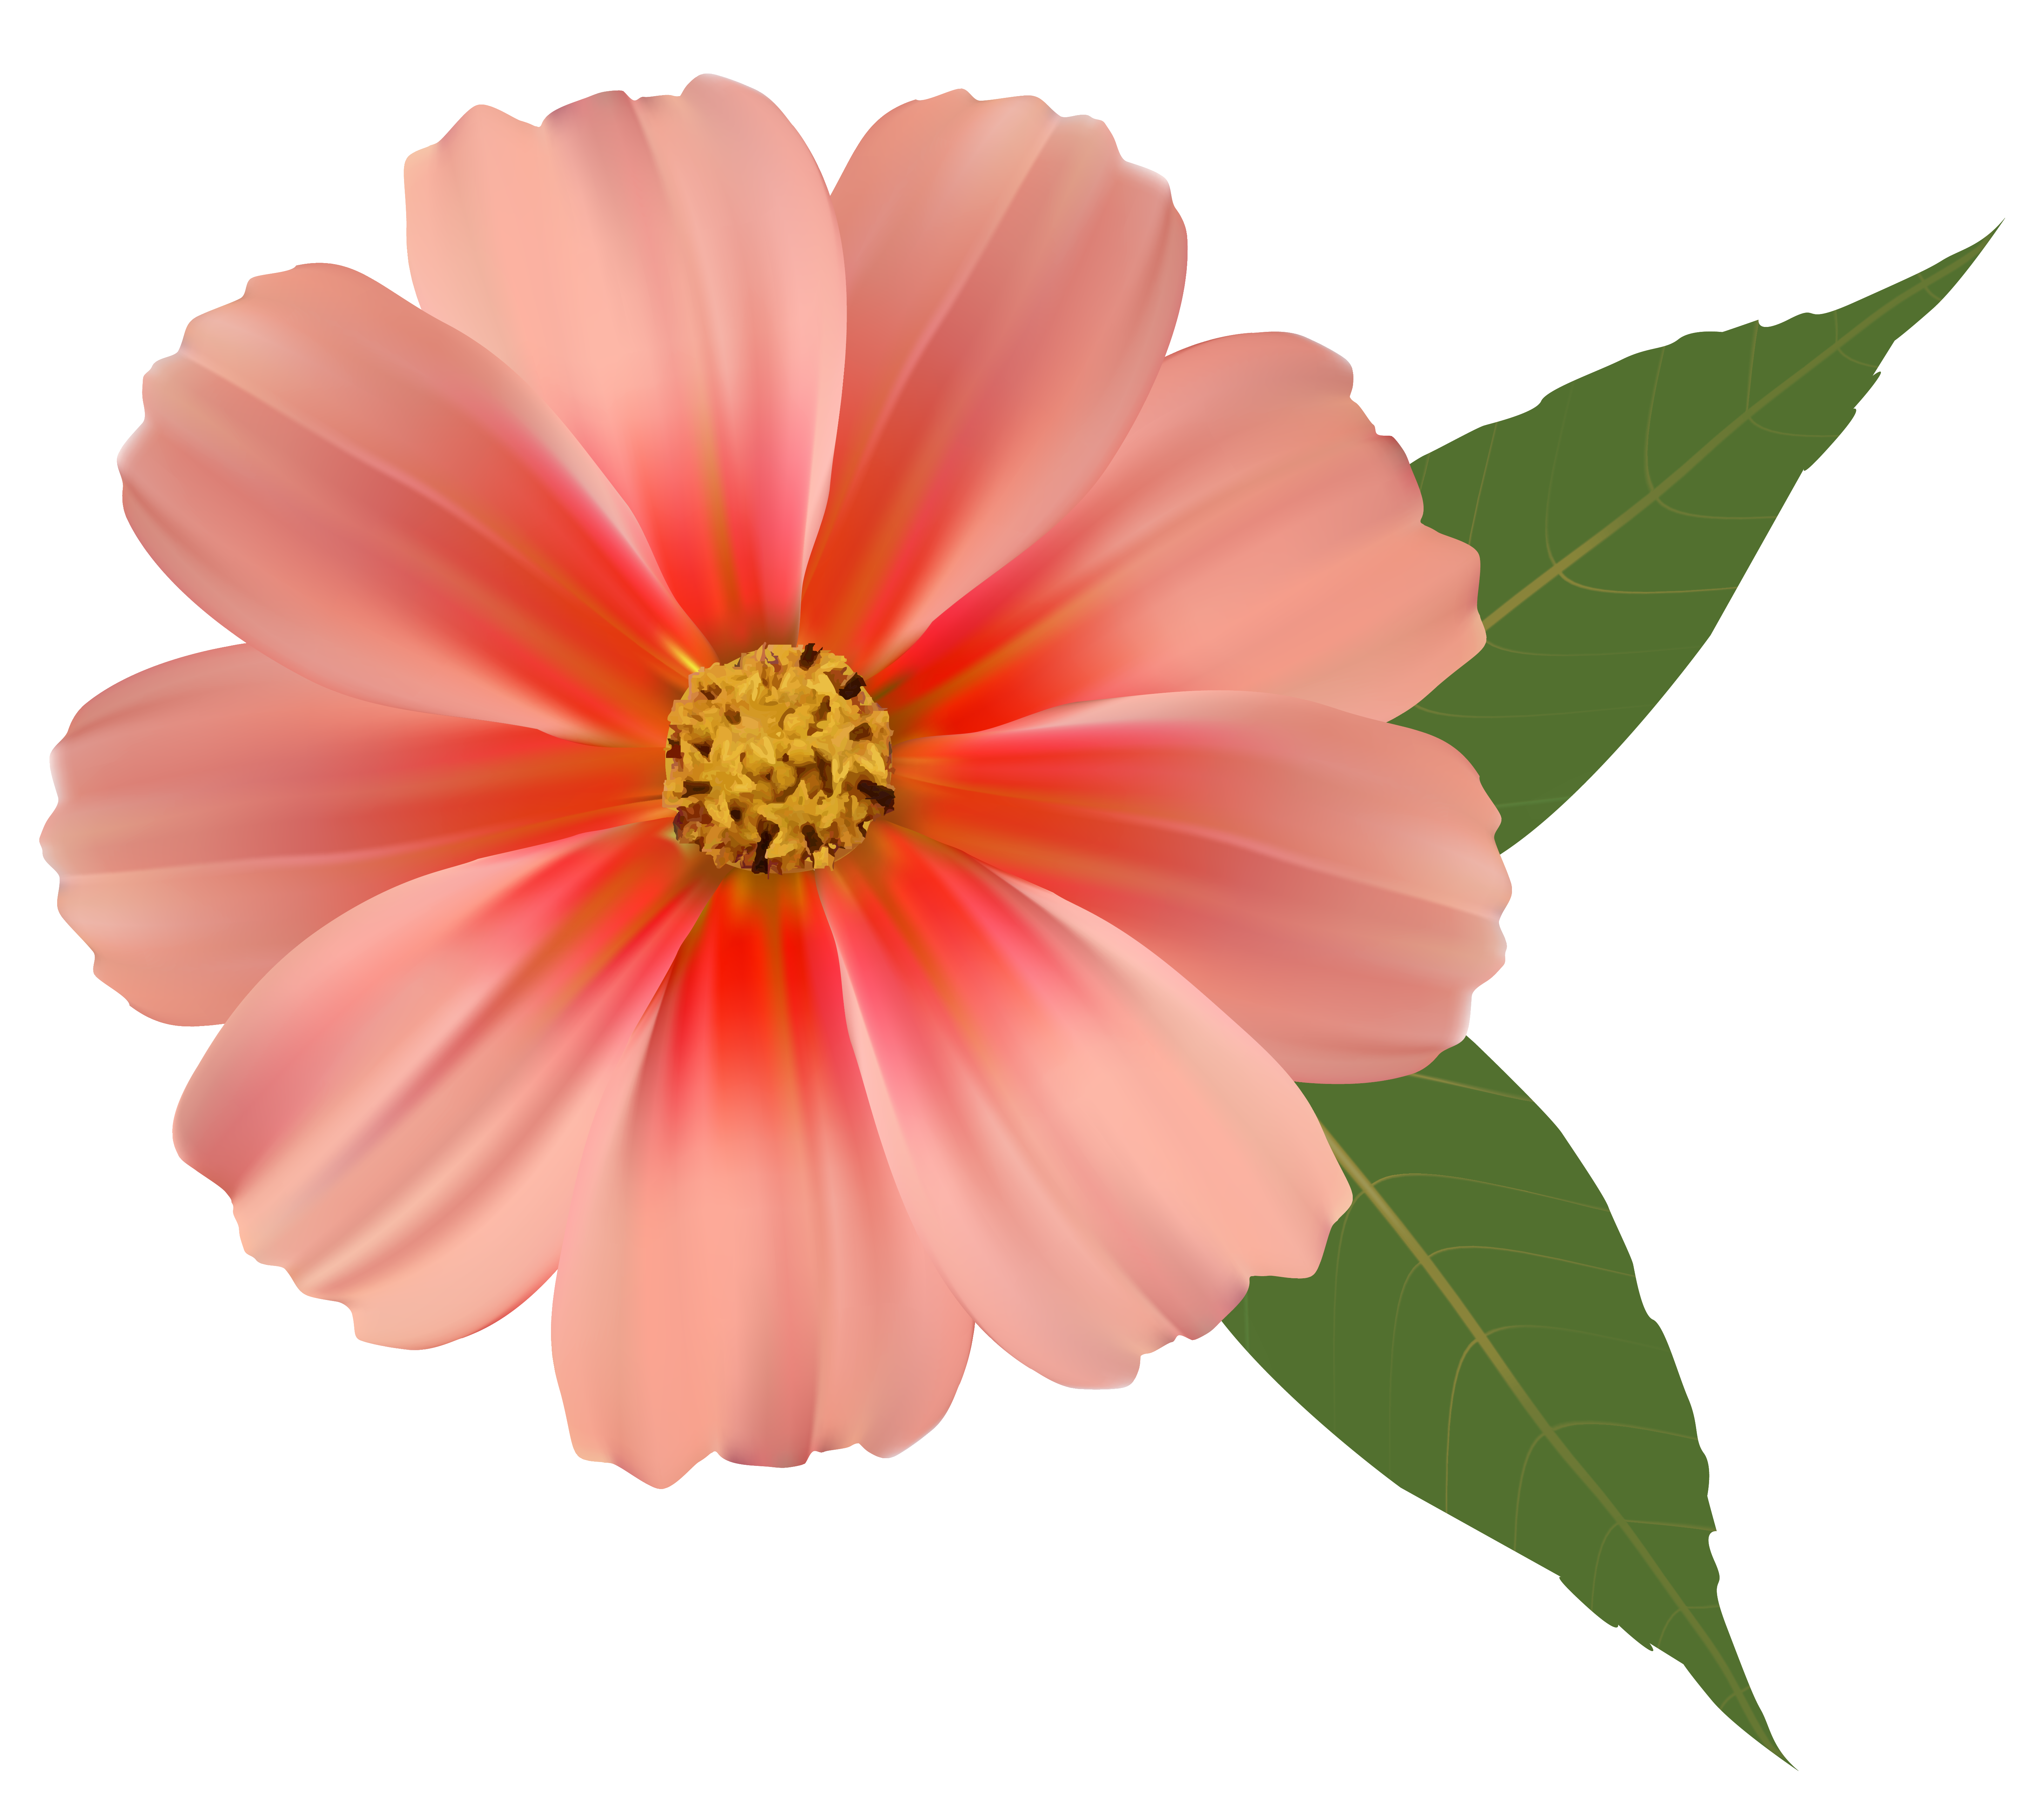 Orange Flower PNG Image Clipart | Gallery Yopriceville ...